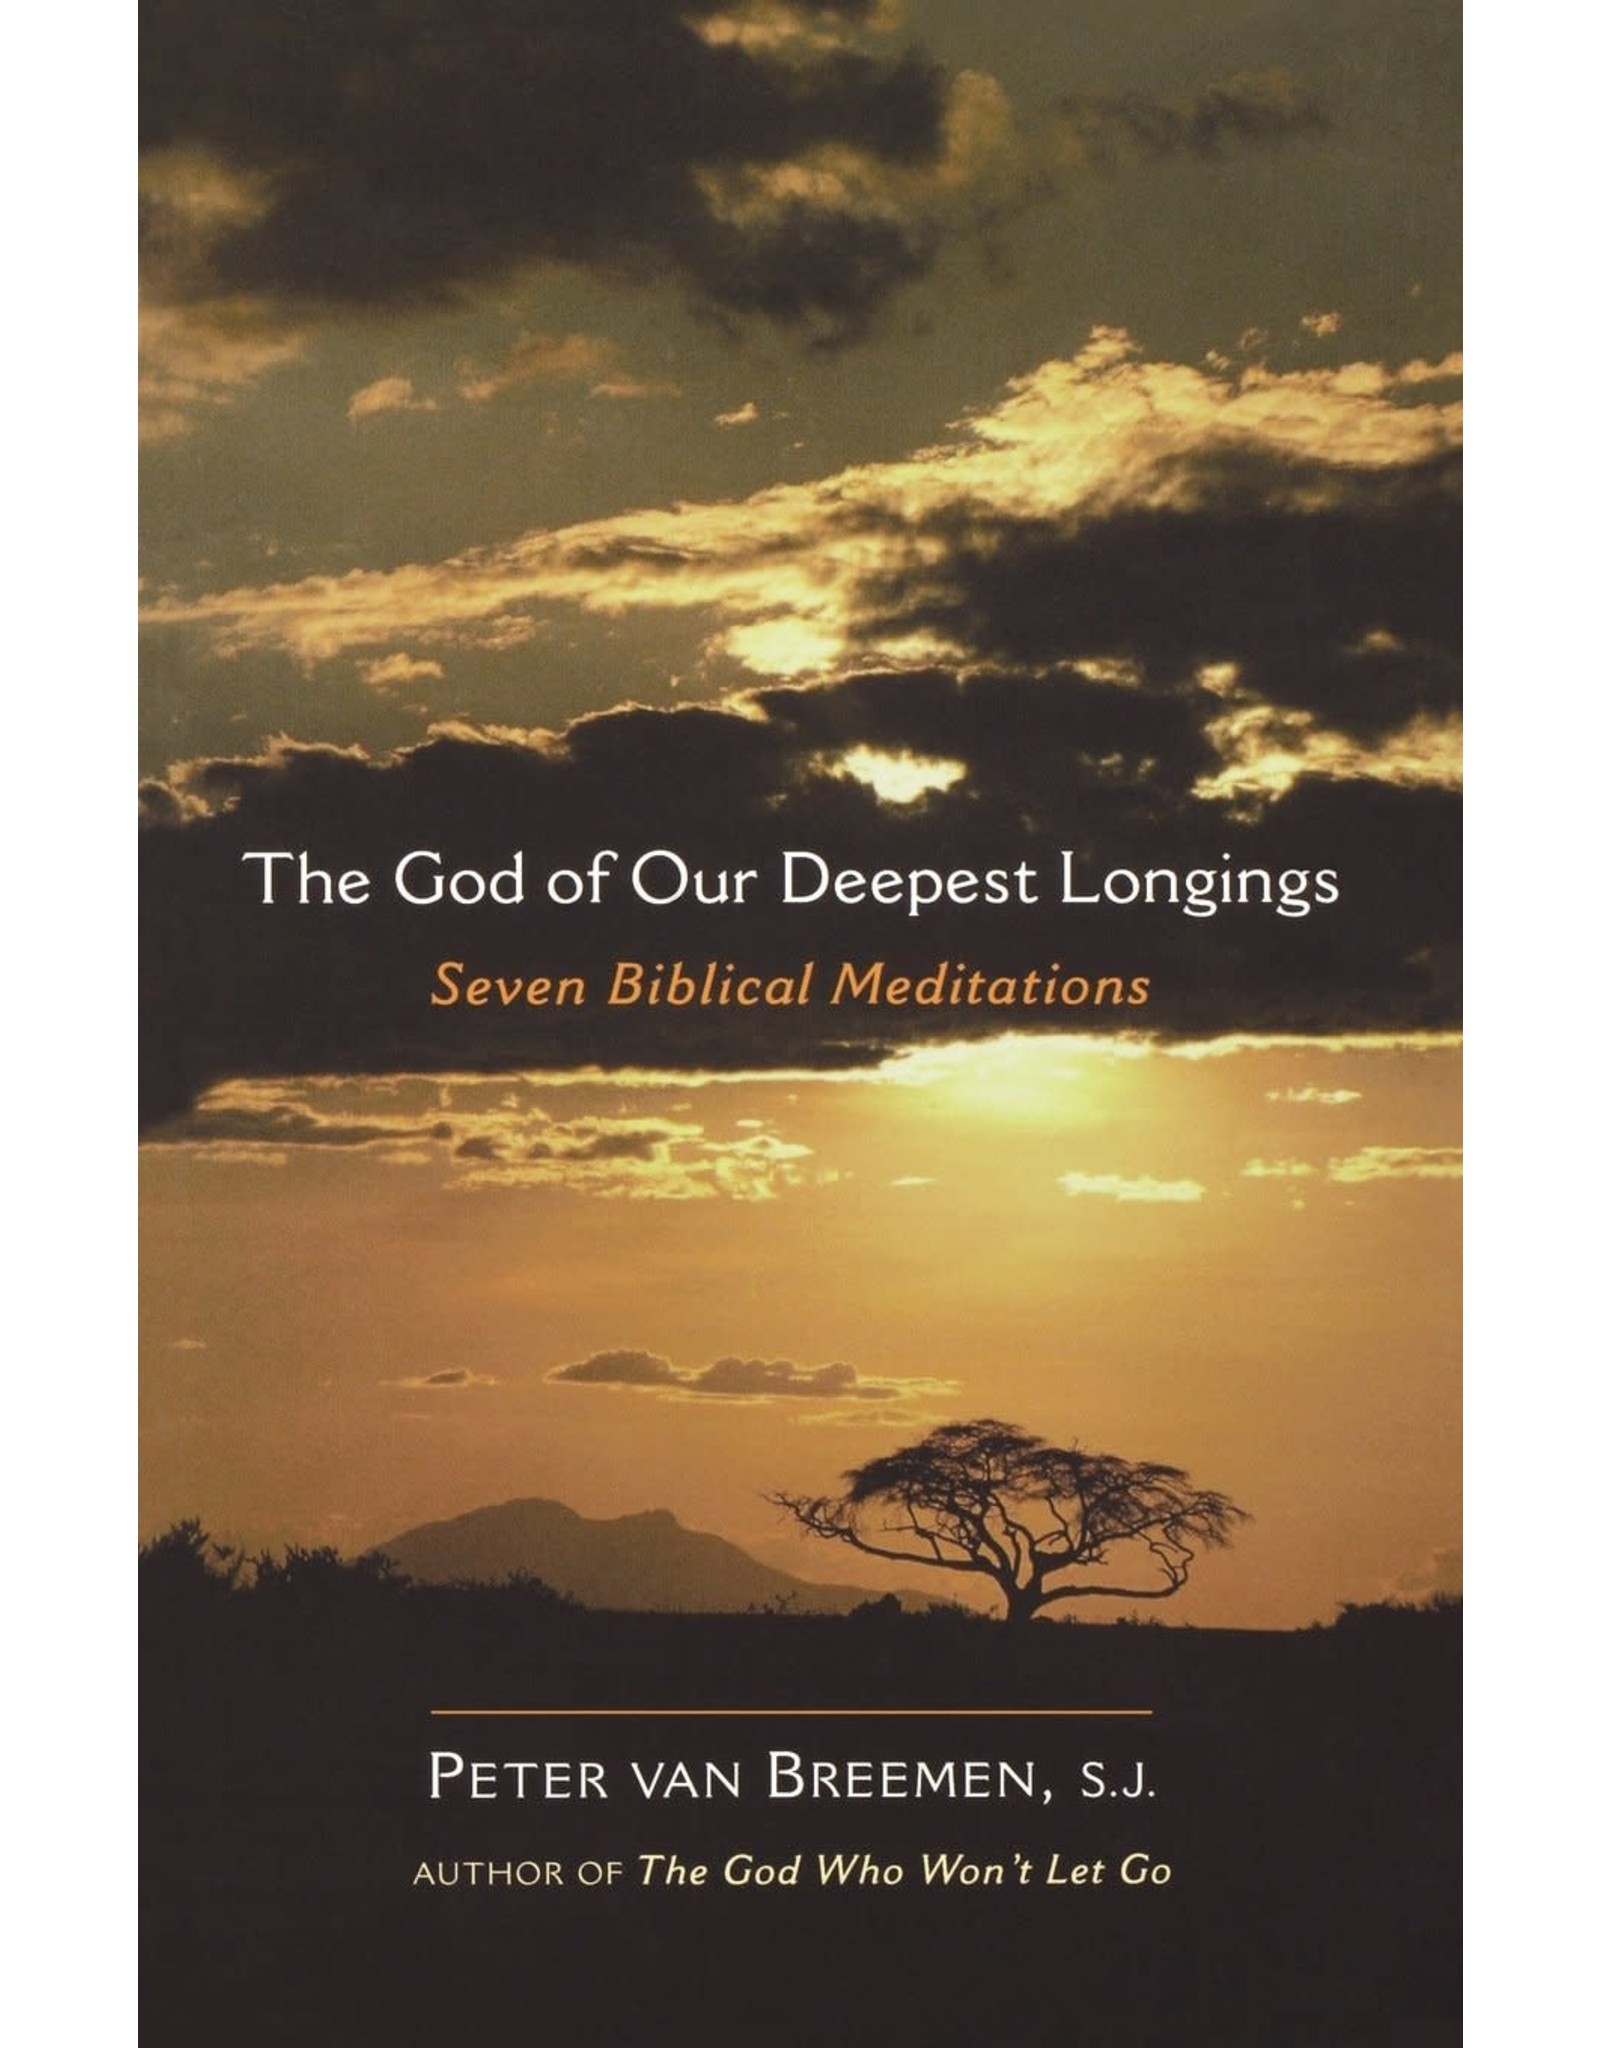 Ave Maria The God of Our Deepest Longings: Seven Biblical Meditations